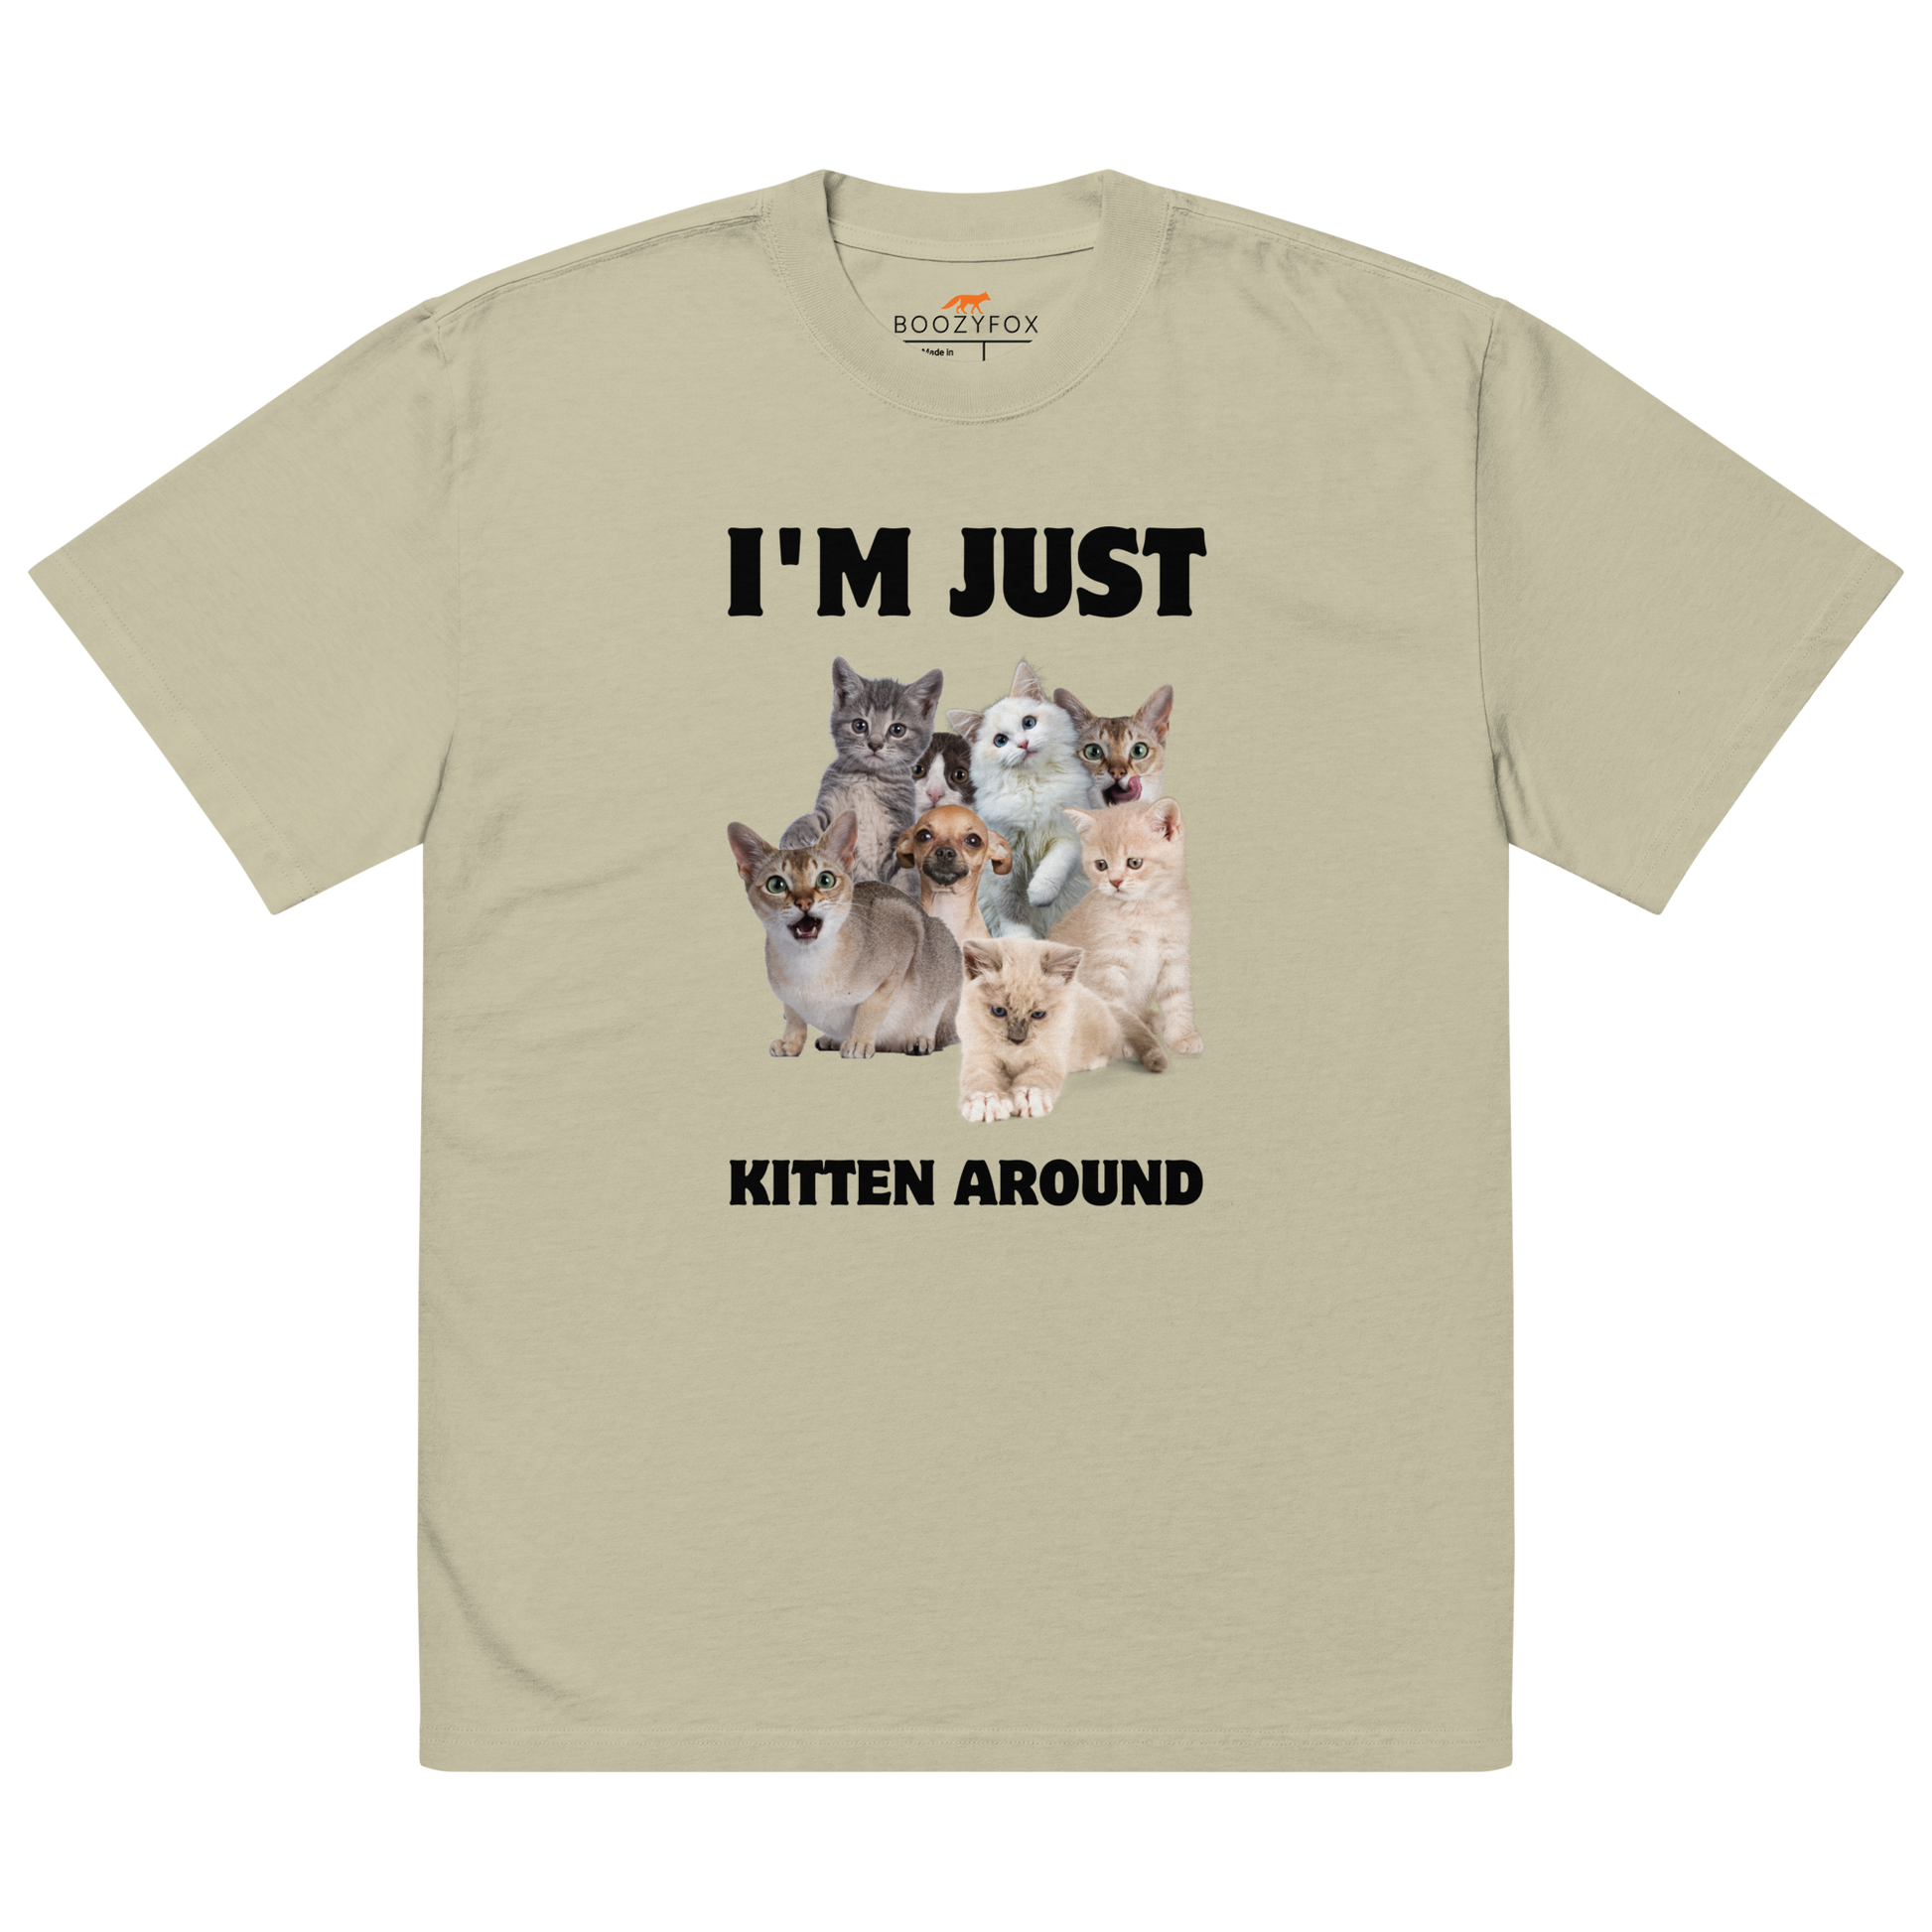 Faded Eucalyptus Cat Oversized T-Shirt featuring an I'm Just Kitten Around graphic on the chest - Funny Graphic Cat Oversized Tees - Boozy Fox